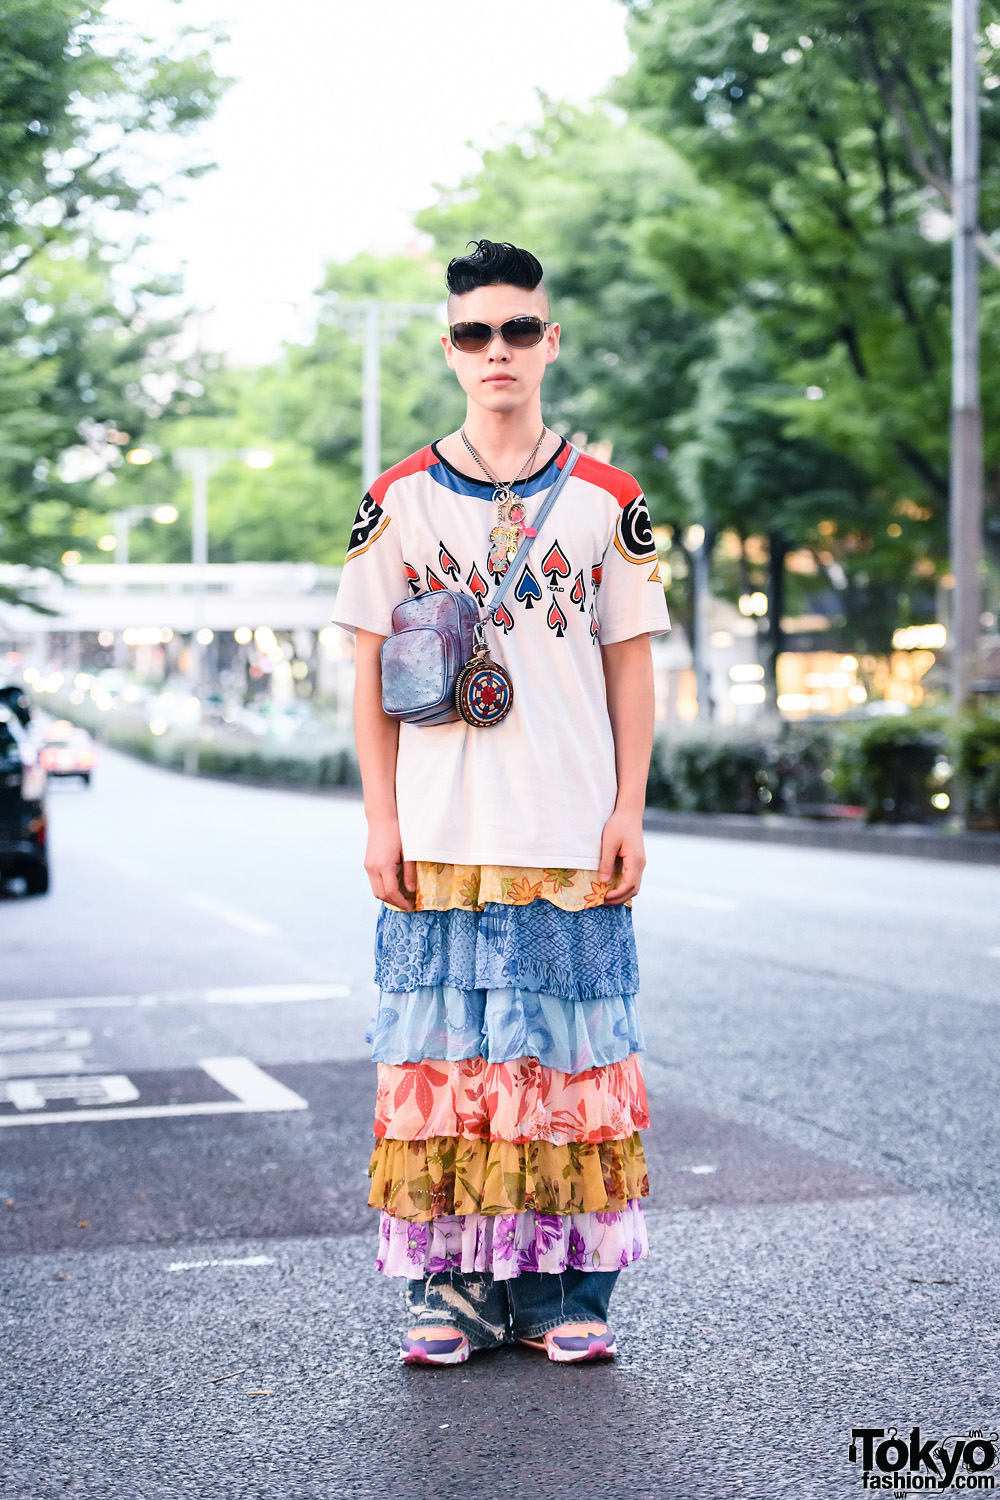 Harajuku Street Style w/ Sunglasses, Layered Necklaces, Head T-Shirt, Vintage Tiered Skirt Over Ripped Jeans, Black Means Coin Purse & Nike Sneakers